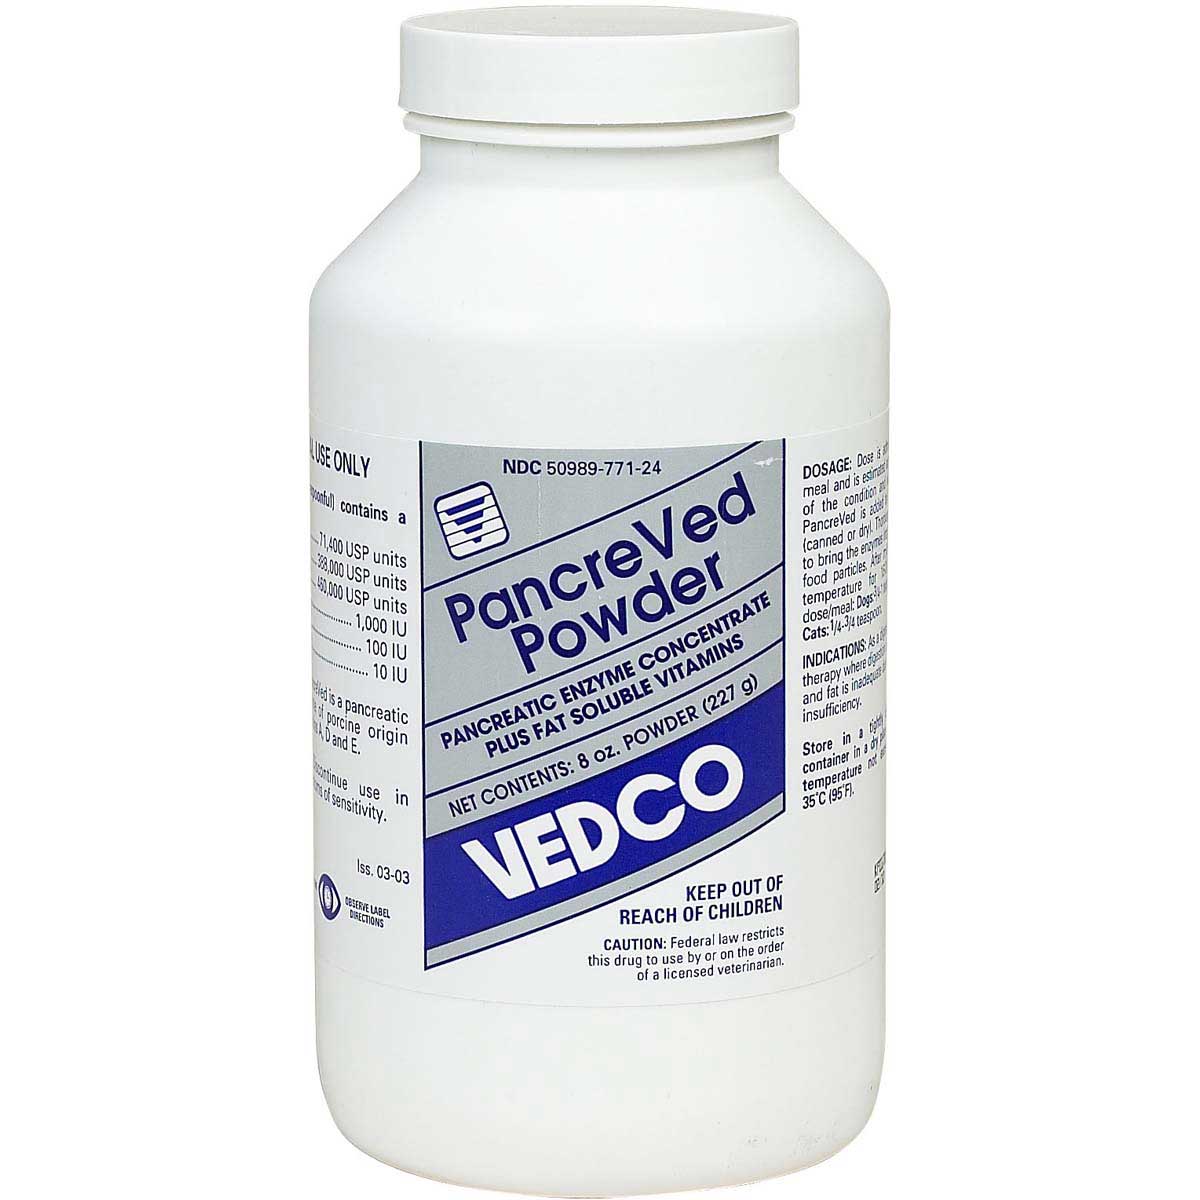 PancreVed Powder for Dogs Cats Vedco 